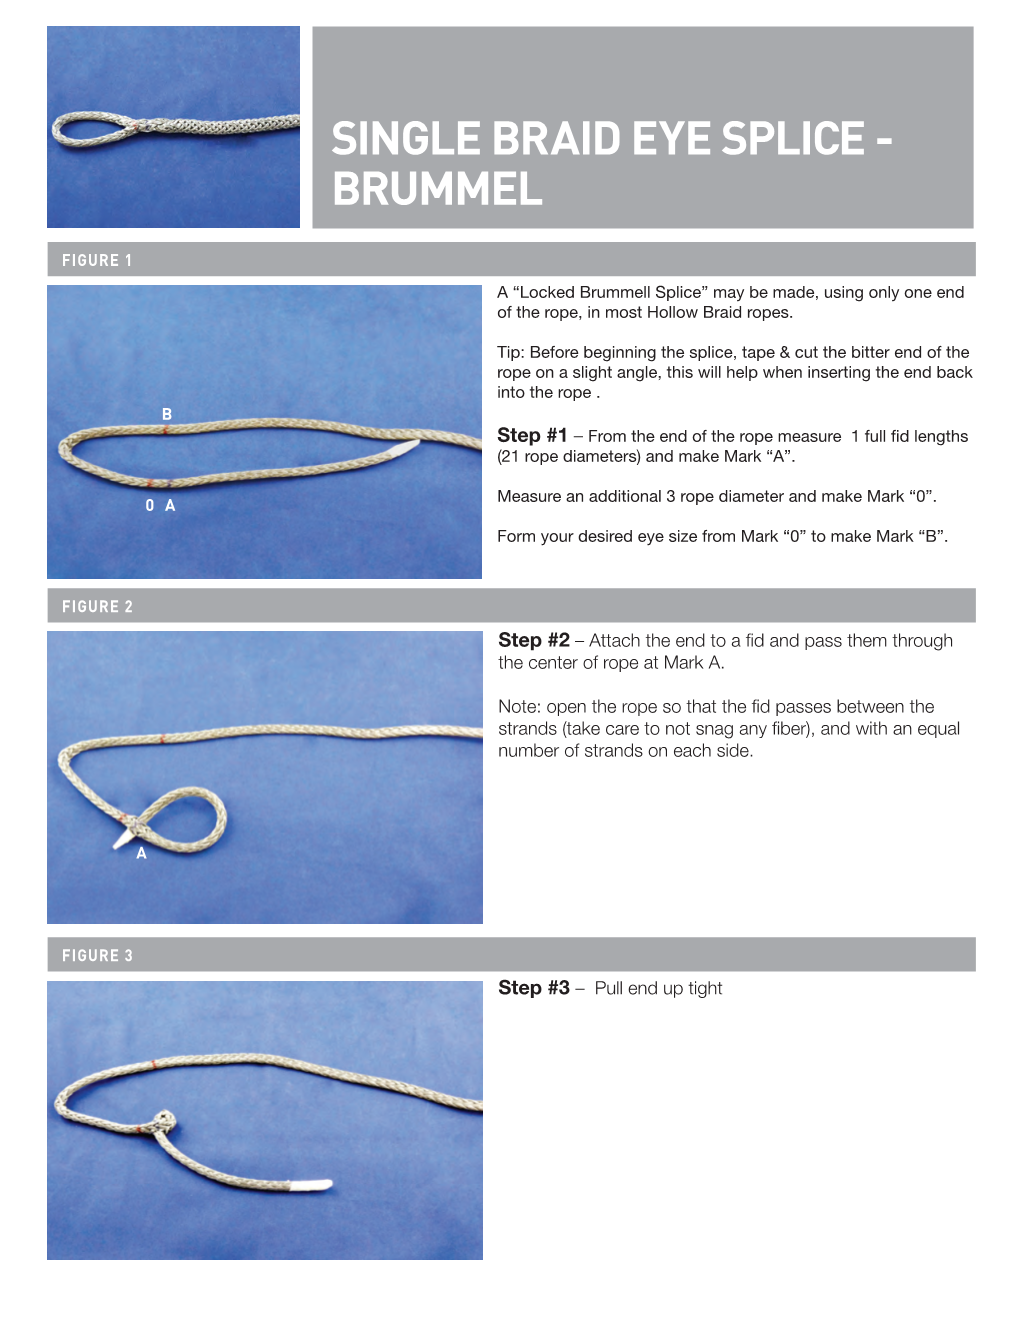 Single Braid Eye Splice - Brummel Figure 1 a “Locked Brummell Splice” May Be Made, Using Only One End of the Rope, in Most Hollow Braid Ropes